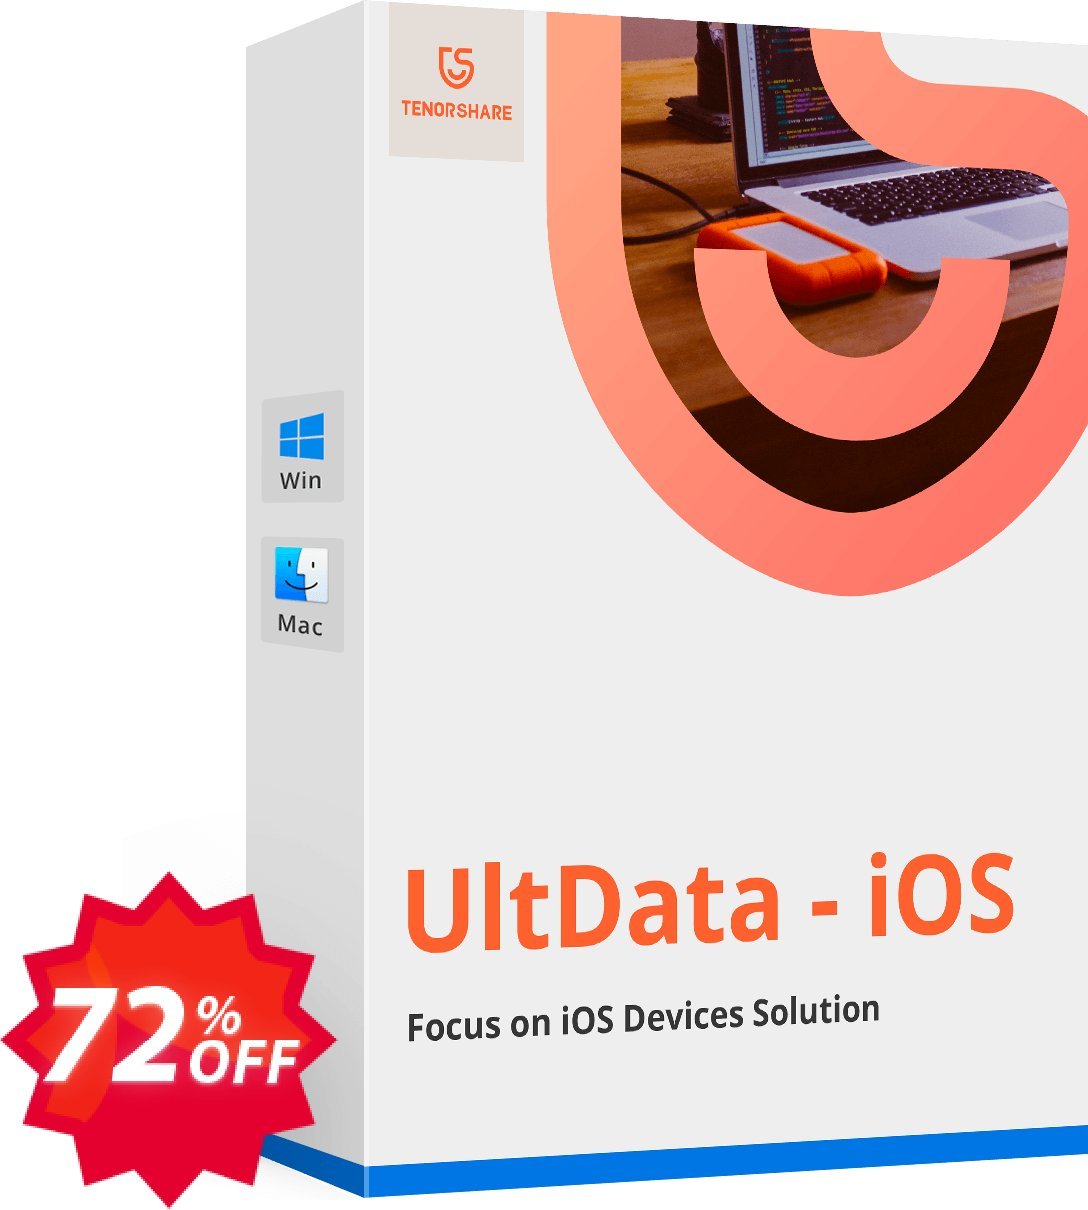 Tenorshare UltData for iOS Coupon code 72% discount 